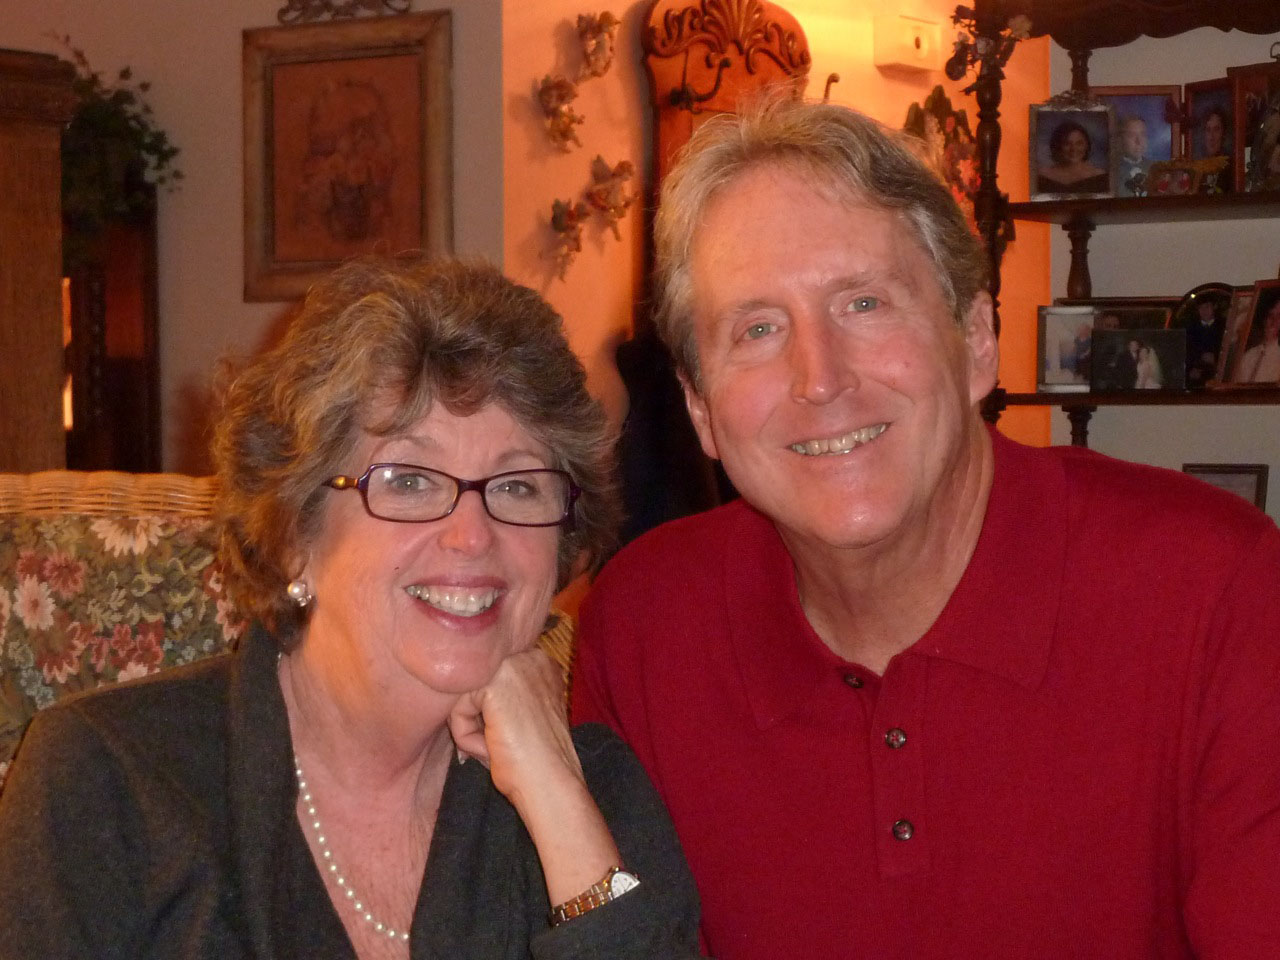 Steve Netherby and his wife, Jackie.